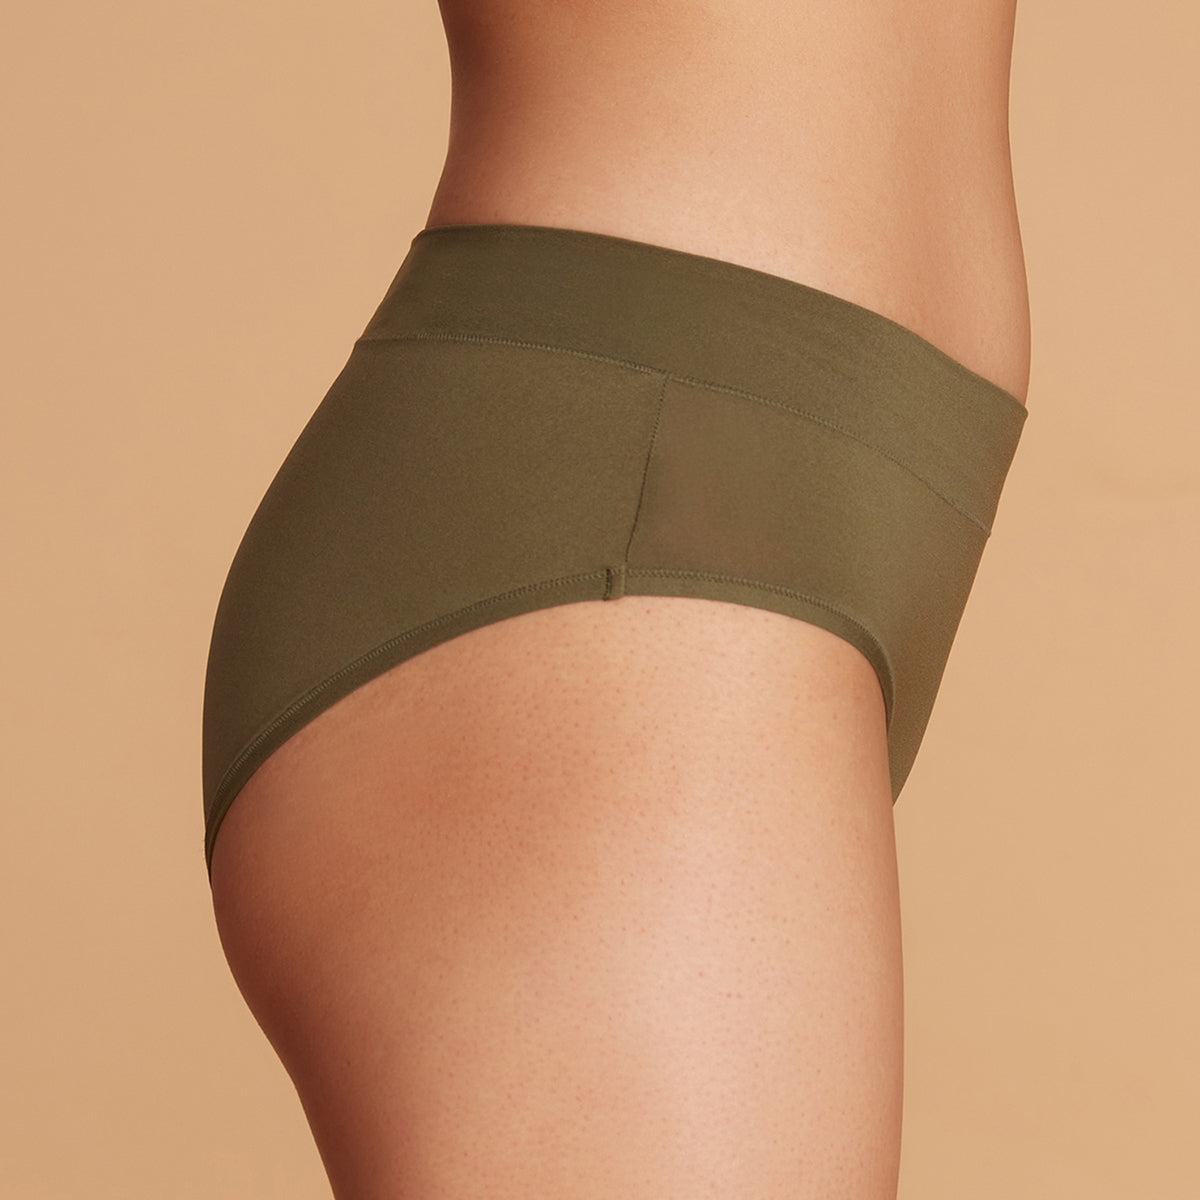 Nykd by Nykaa 4 Way Stretch Hipster Panty - NYP342 - Olive